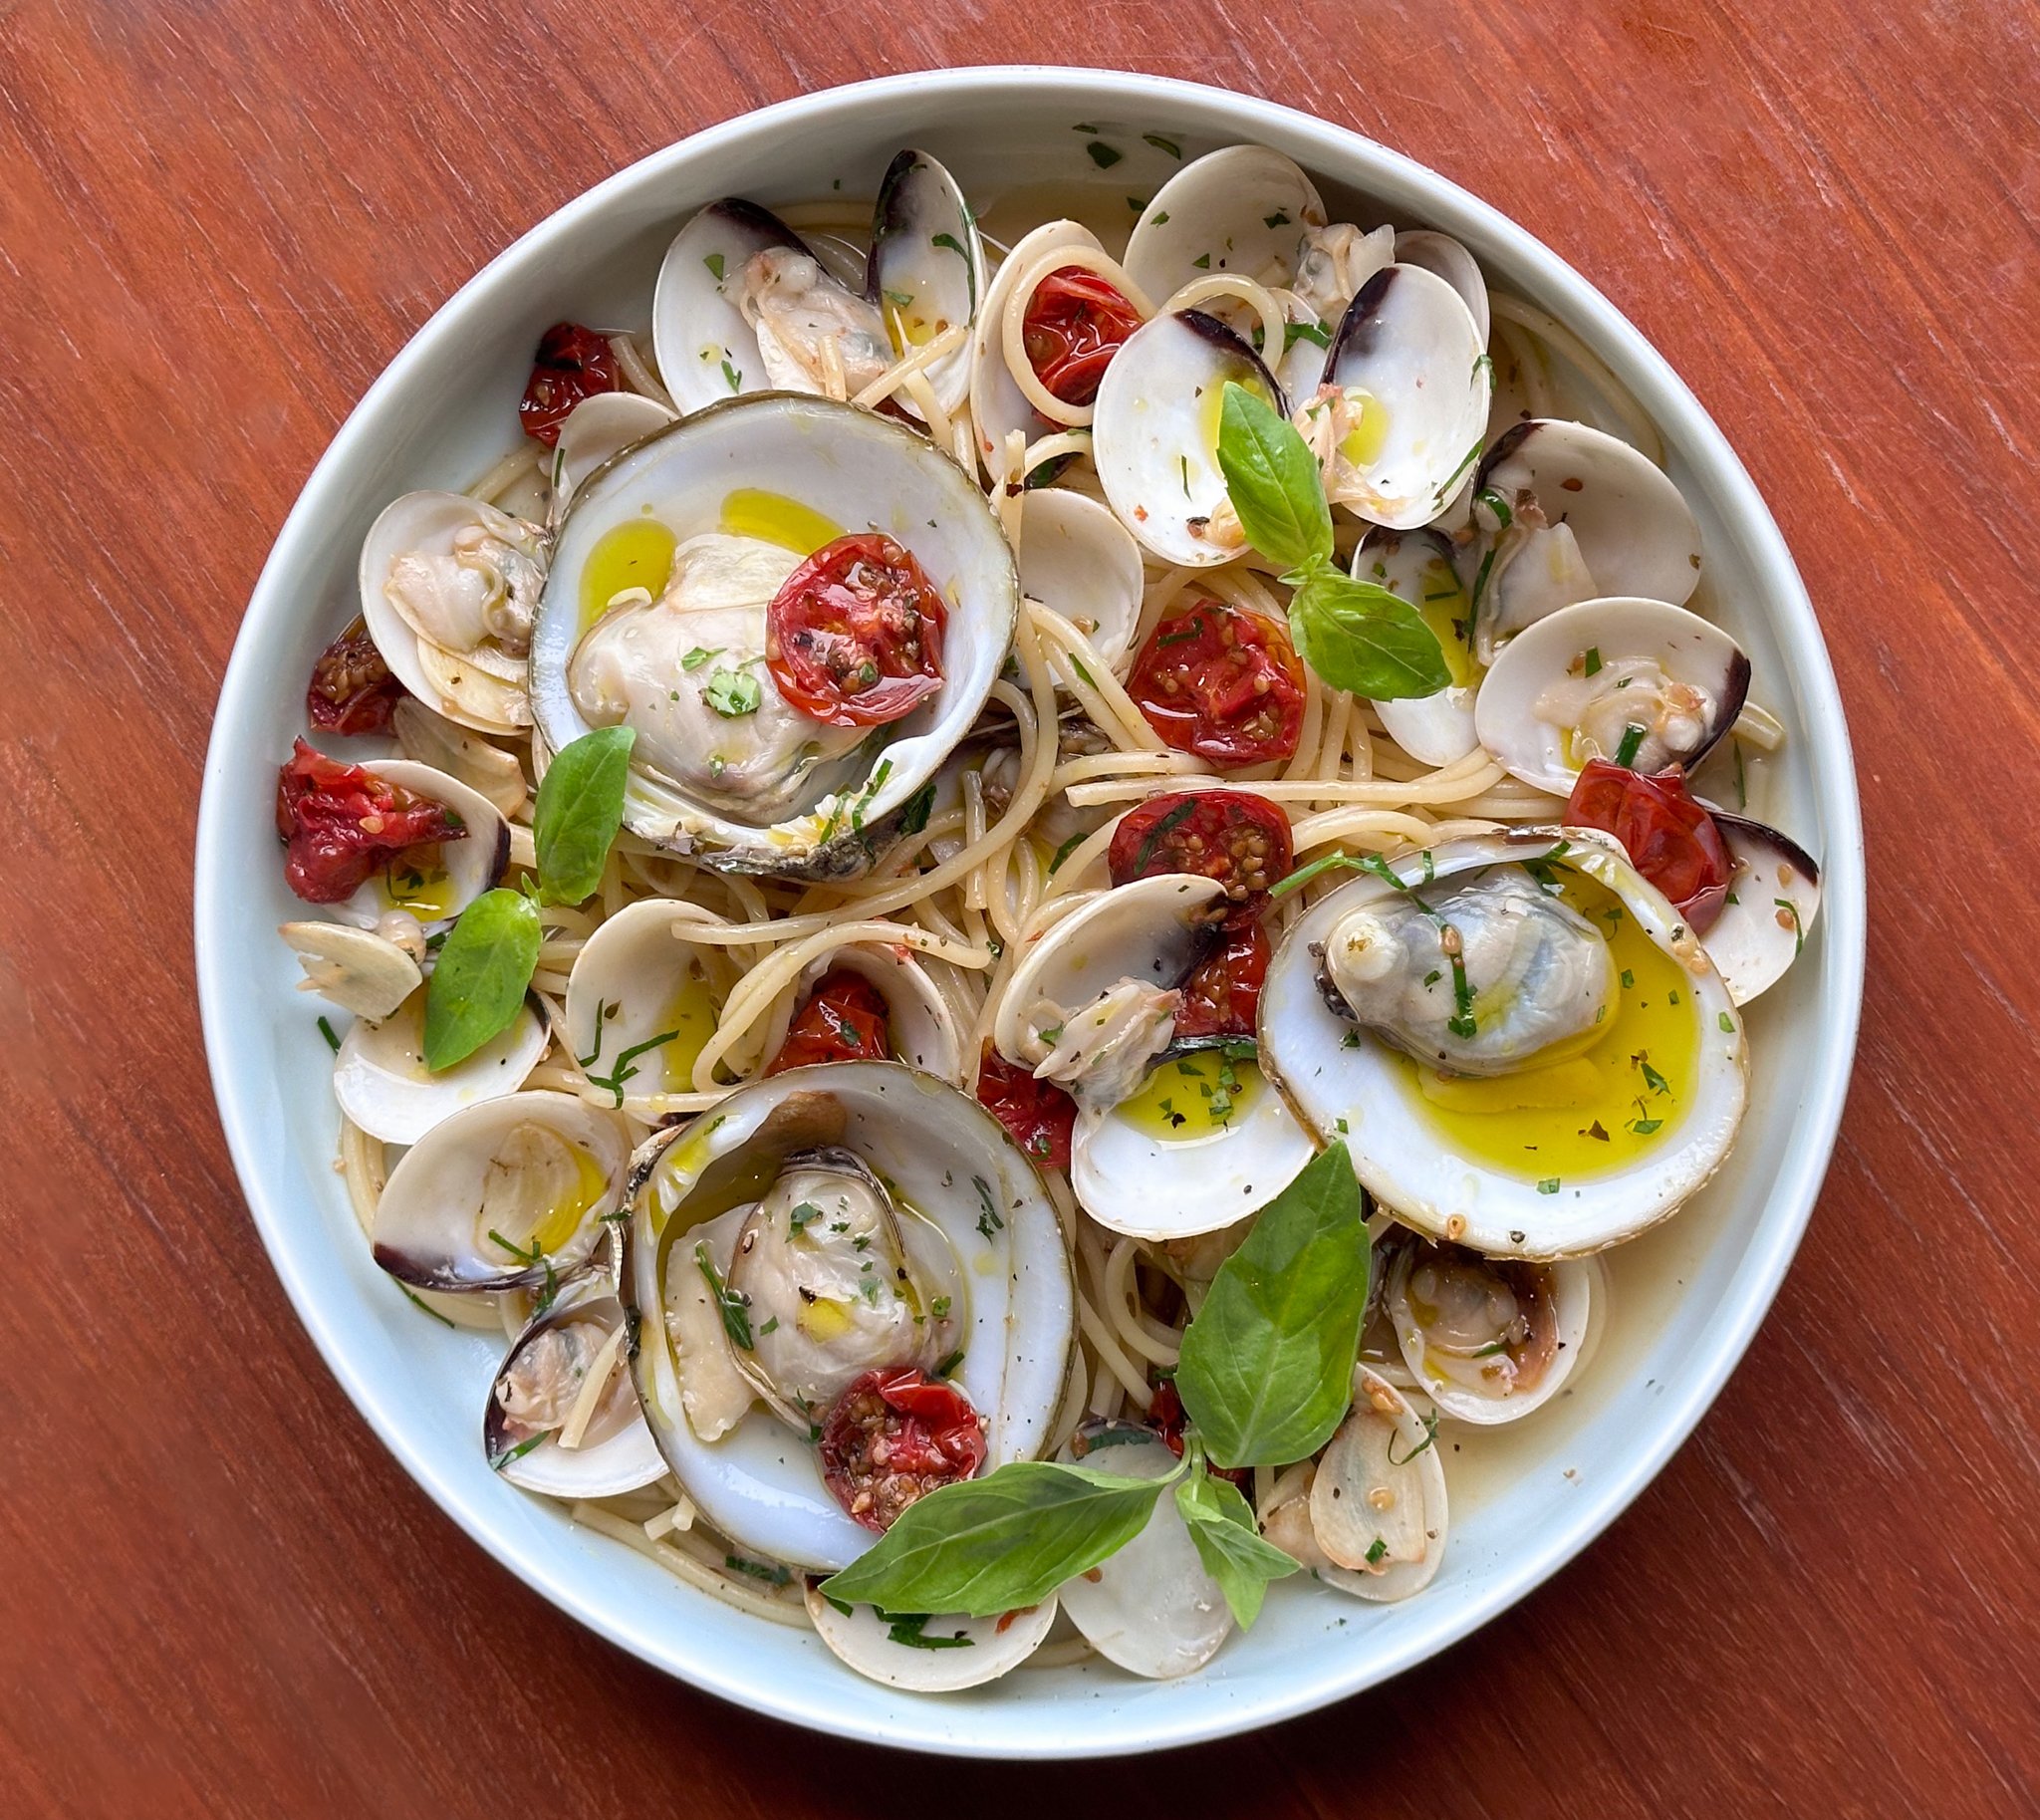 From 22 to 26 May, experience the spirit of Italy's stunning coastal summers with every bite of our Spaghetti Vongole!

Dive into depths of the flavours of pleasantly briny yet sweet Venus clams, tangy confit tomatoes, and the goodness of garlic and 